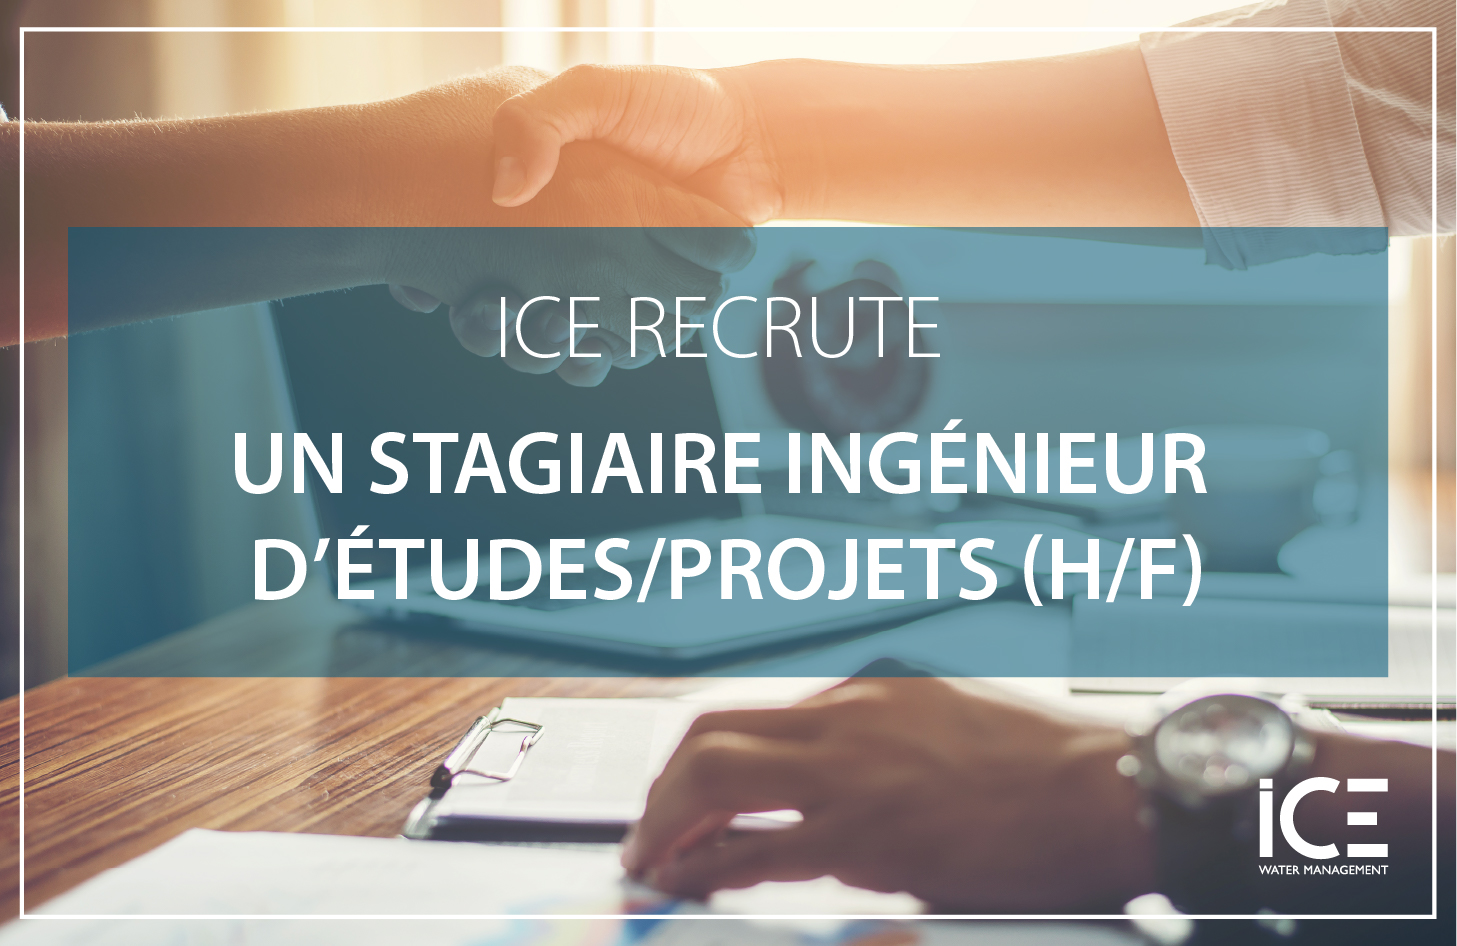 ICE IS RECRUITING A PROJECT ENGINEER TRAINEE